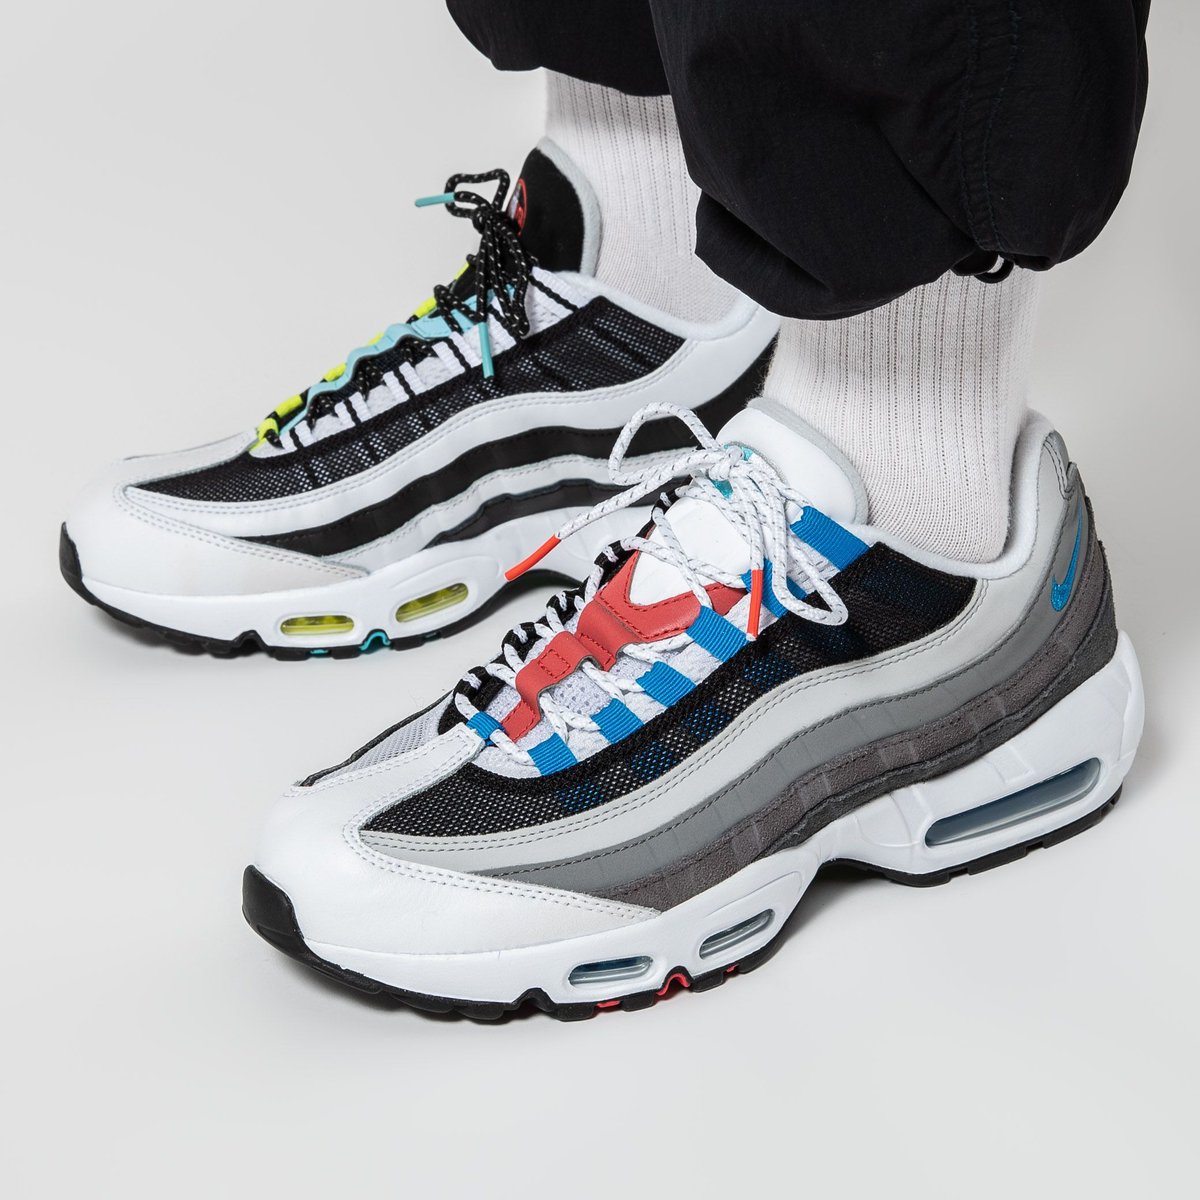 solefed on Twitter: "Ad: Air 95 'Greedy 2.0' via Snipes USA https://t.co/oOnIBxVQAI https://t.co/oeJ3ZoAgB2" / Twitter